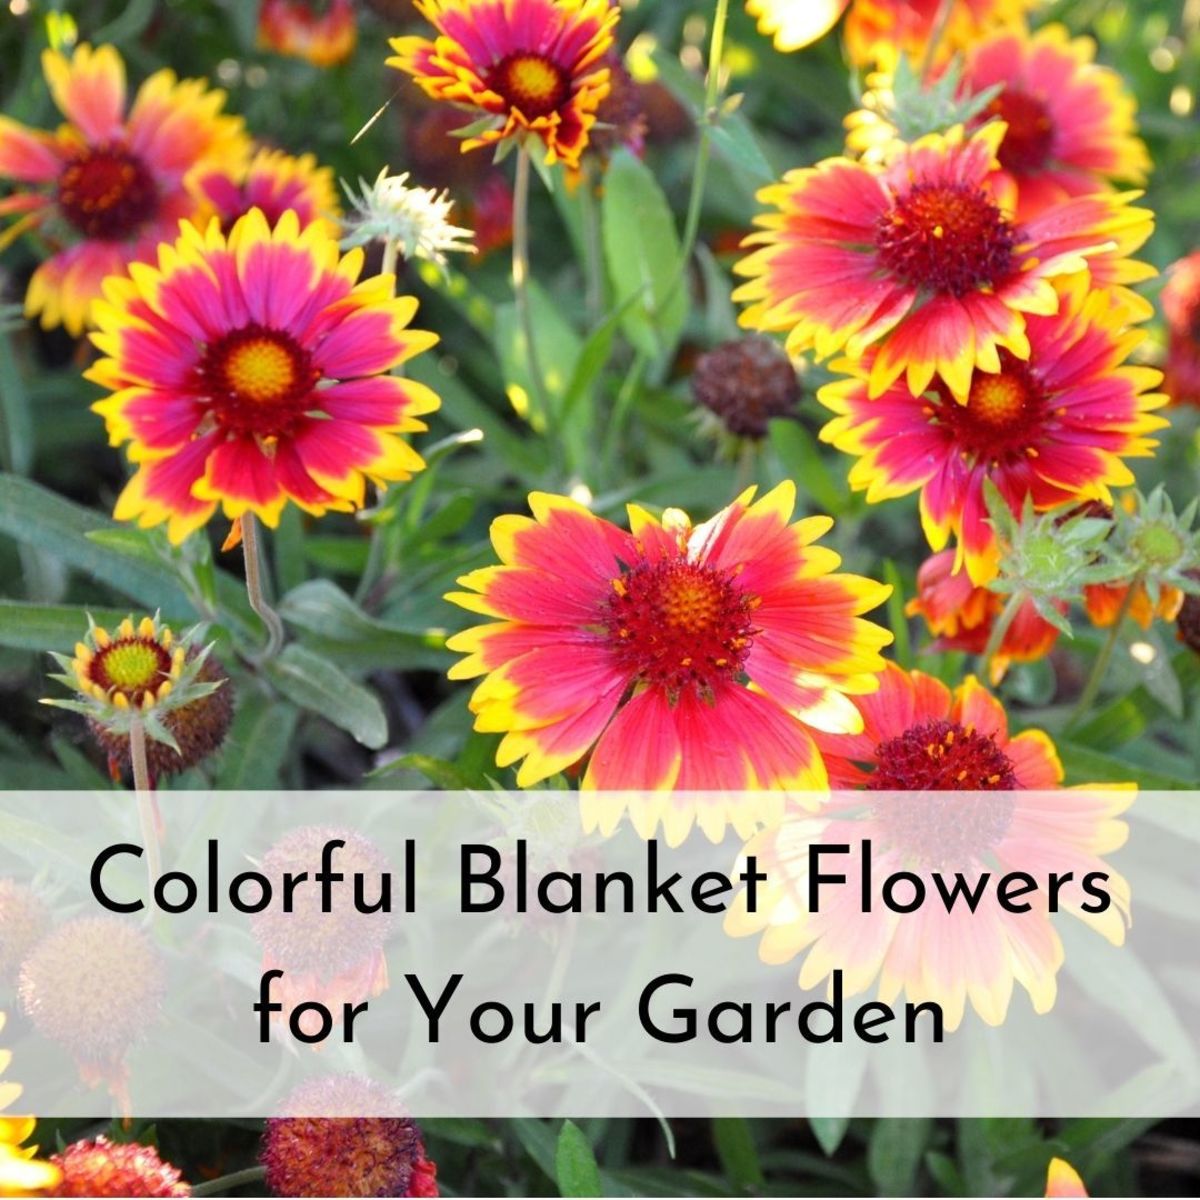 Colorful Blanket Flowers Loved by Butterflies, Birds, and Bees